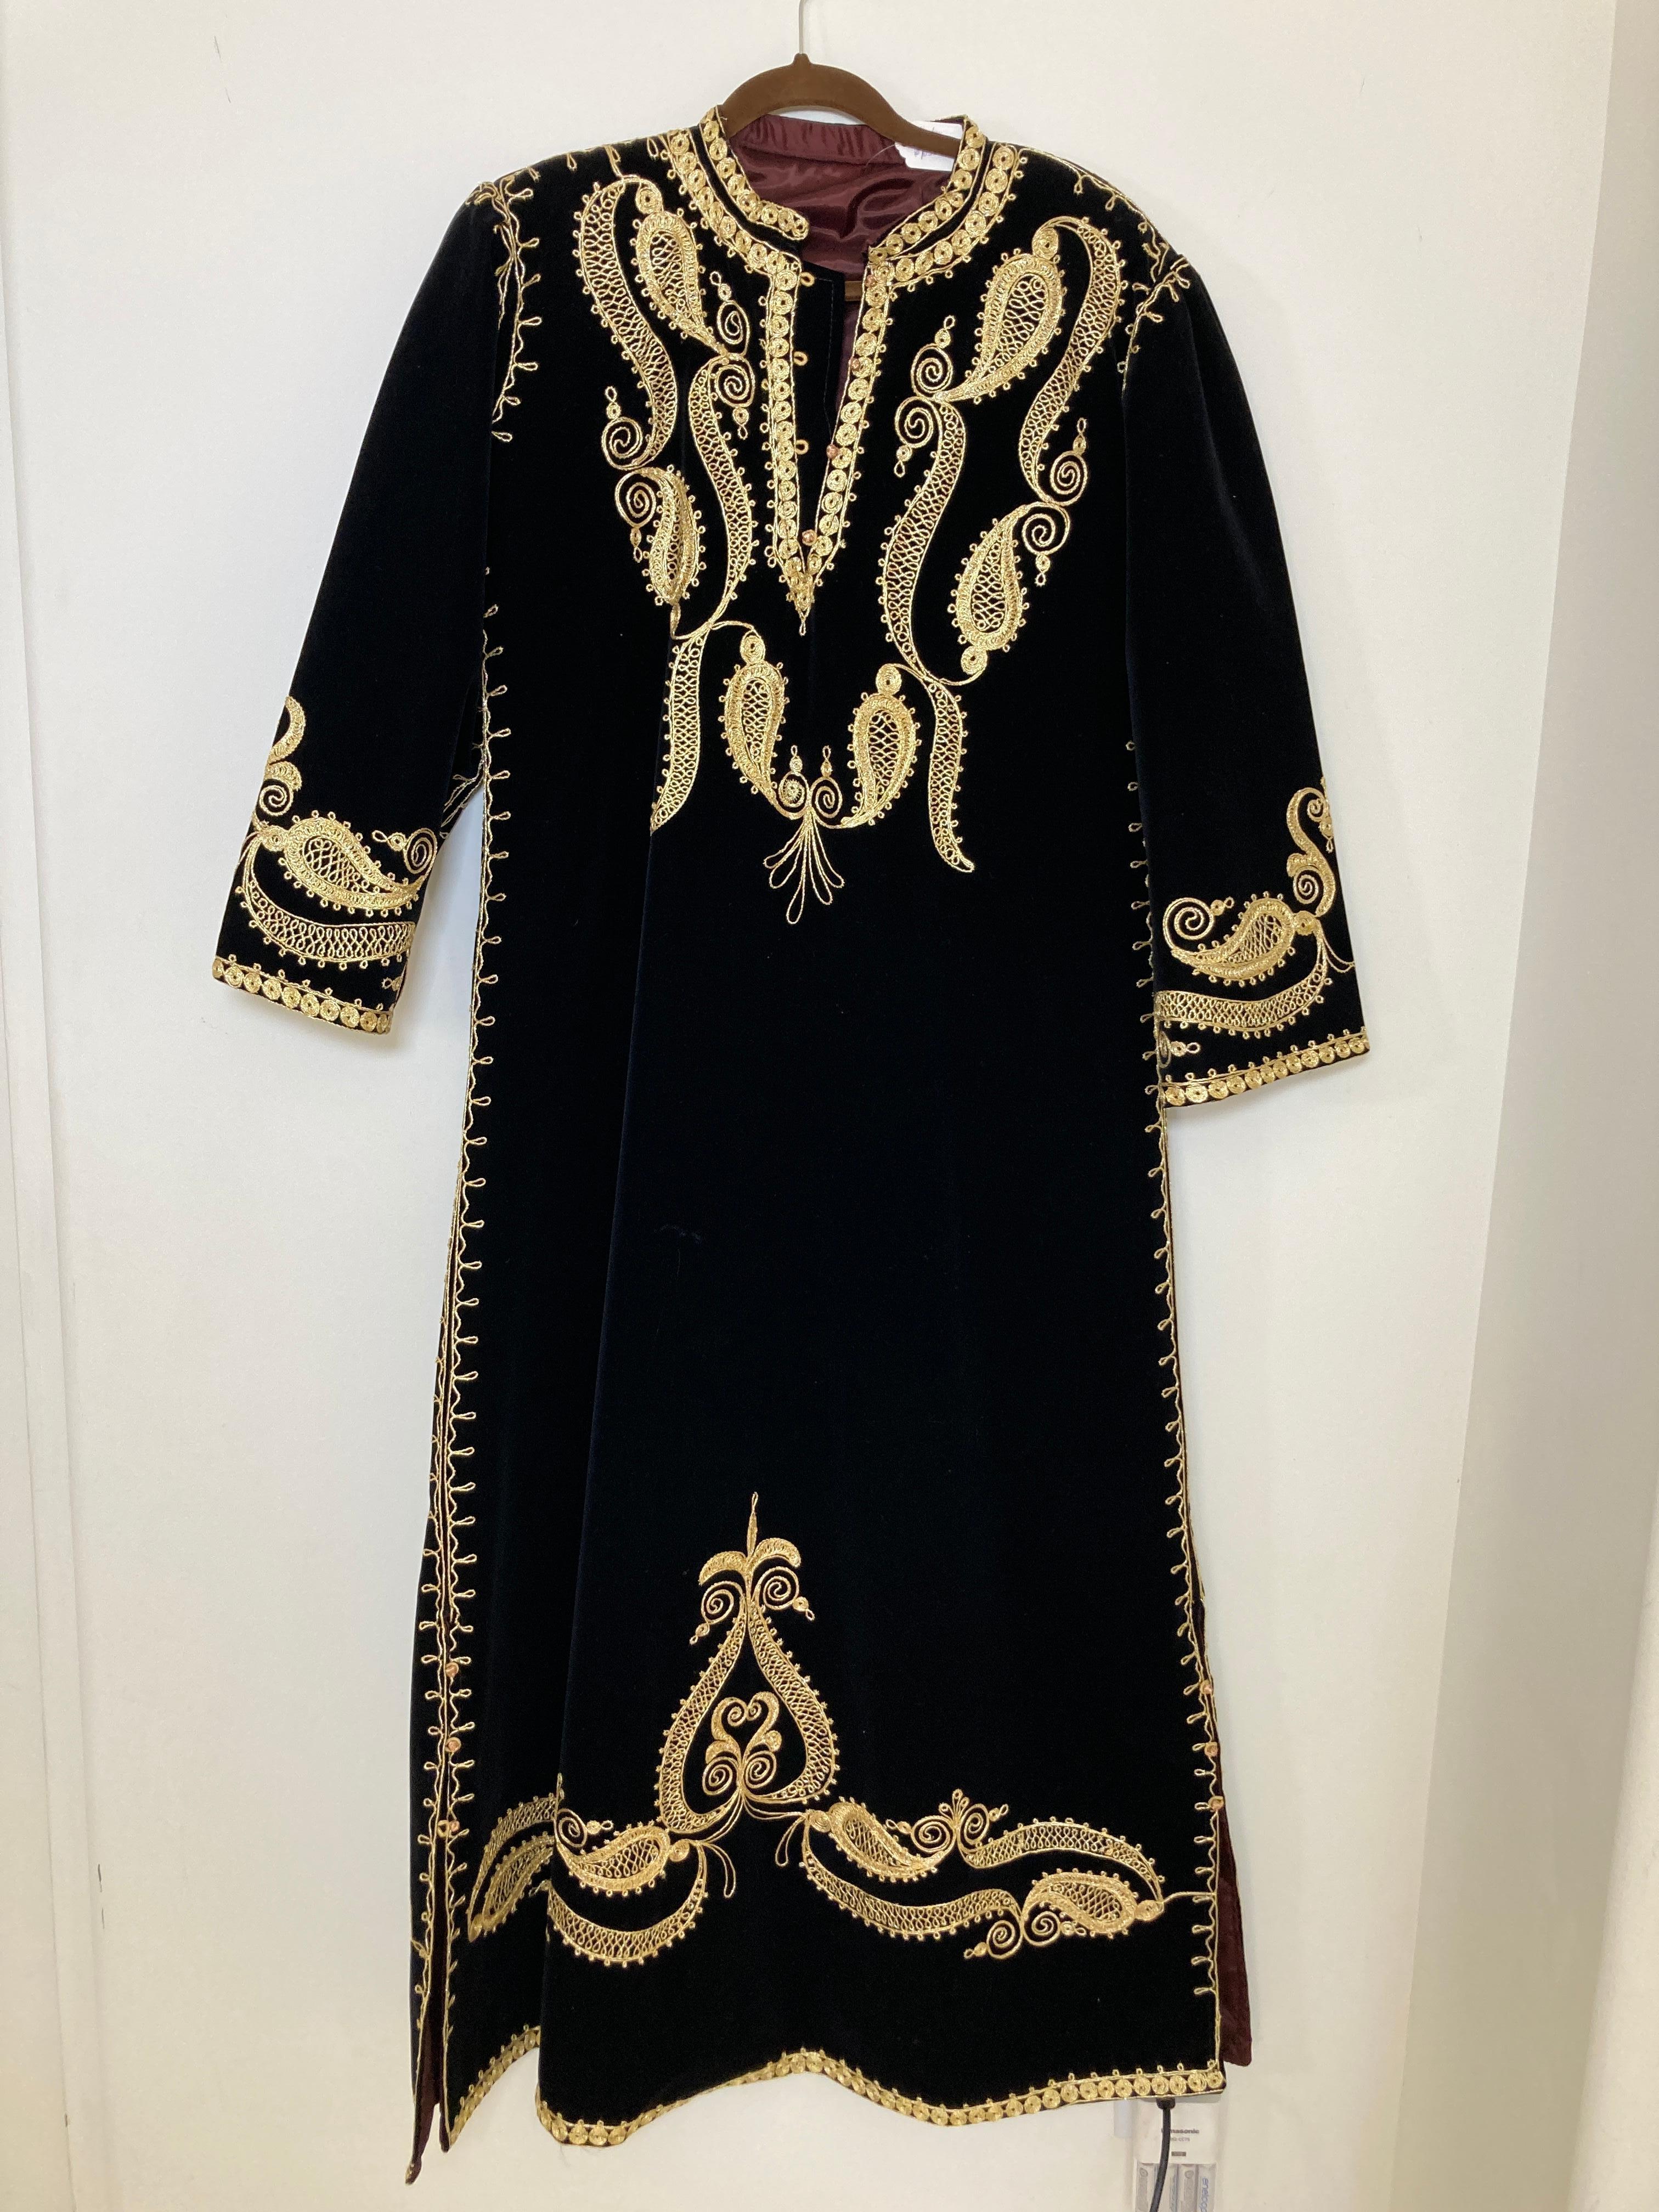 The Bindalli henna dress is a garment made for special occasions such as weddings.
Bindallis were worn by the bride, and her female family and friends. 
Marked by elaborate floral designs bindallis were decorated with dival embroidery, a technique